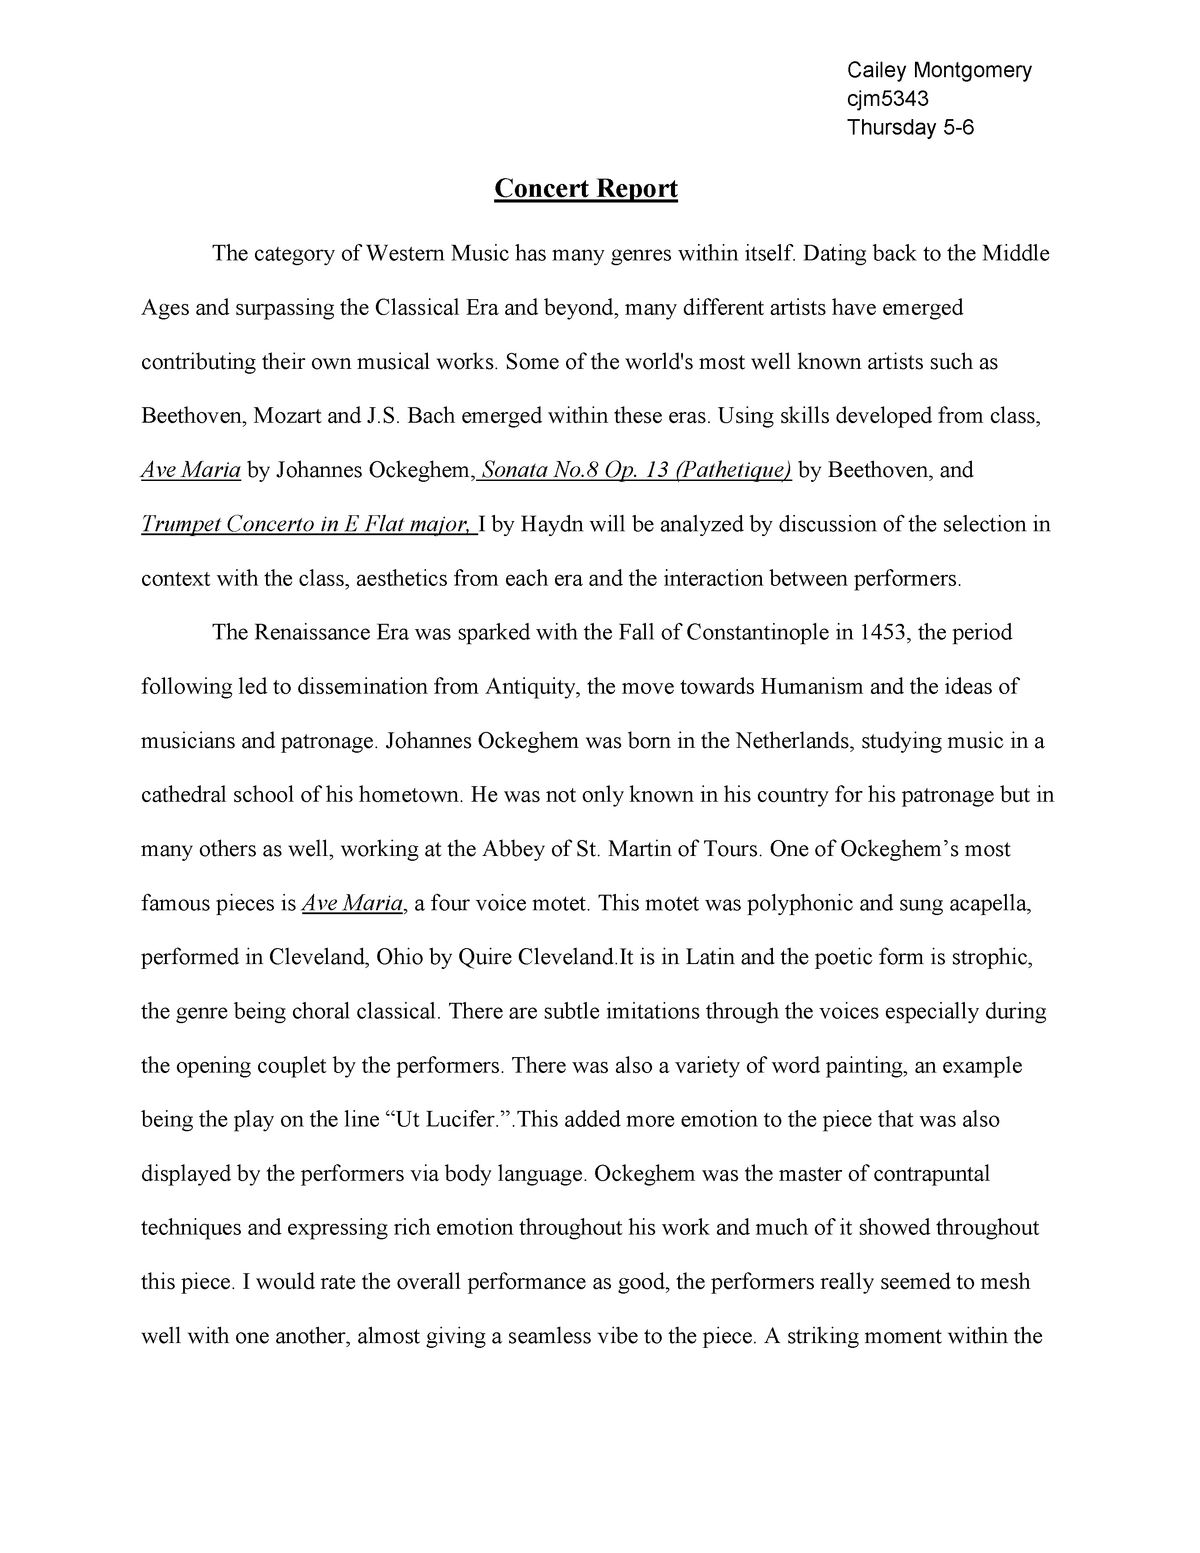 Реферат: Woodstock Essay Research Paper Many large concerts